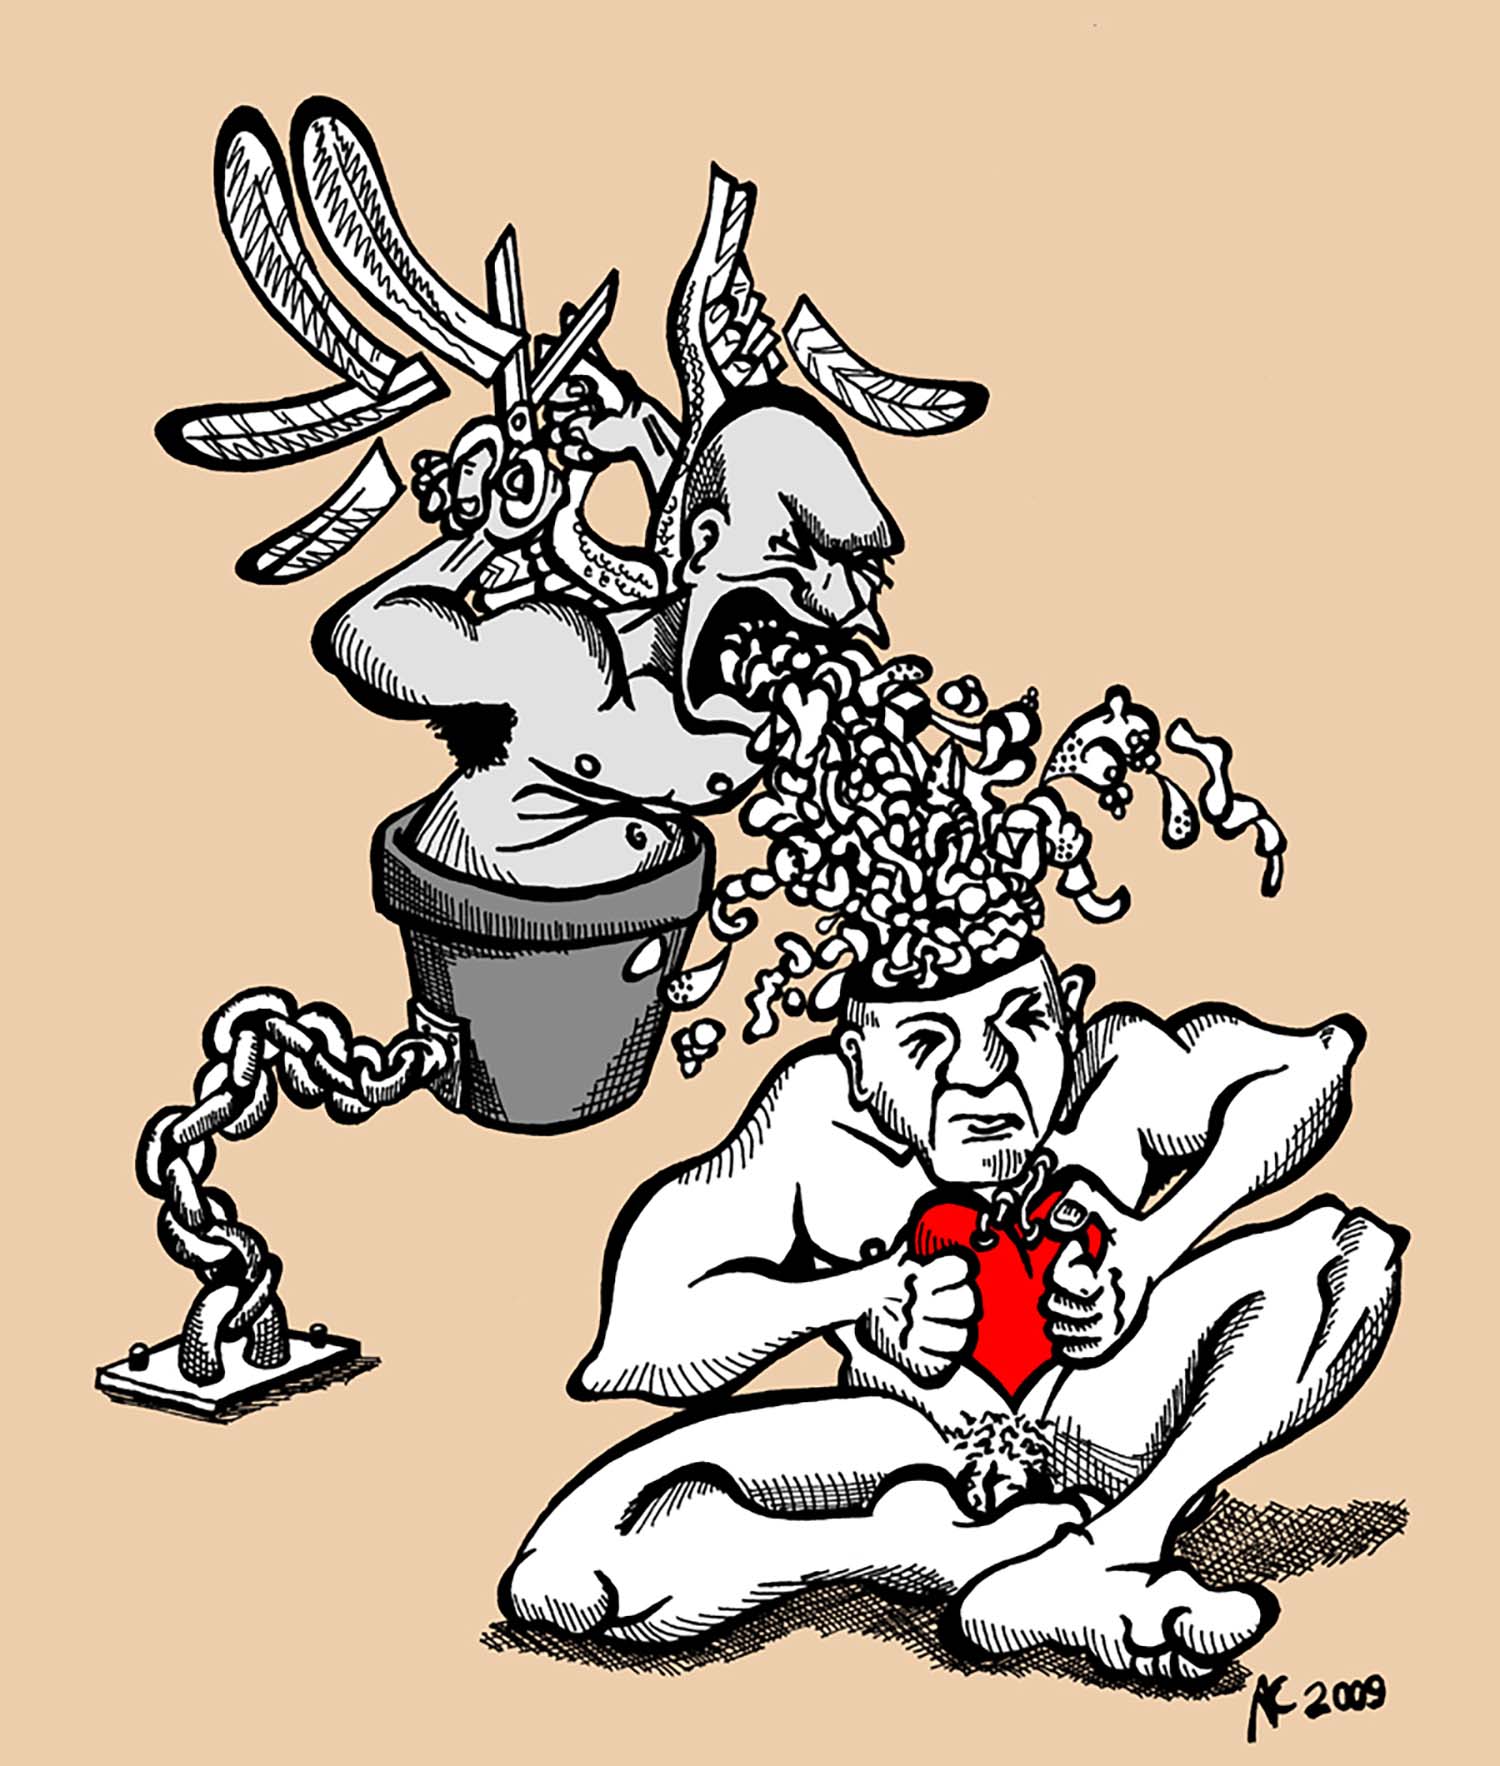 2009-02 Influences - Vomiting Into Someone Else's Mind - 800x942 - by Alessandro Casella